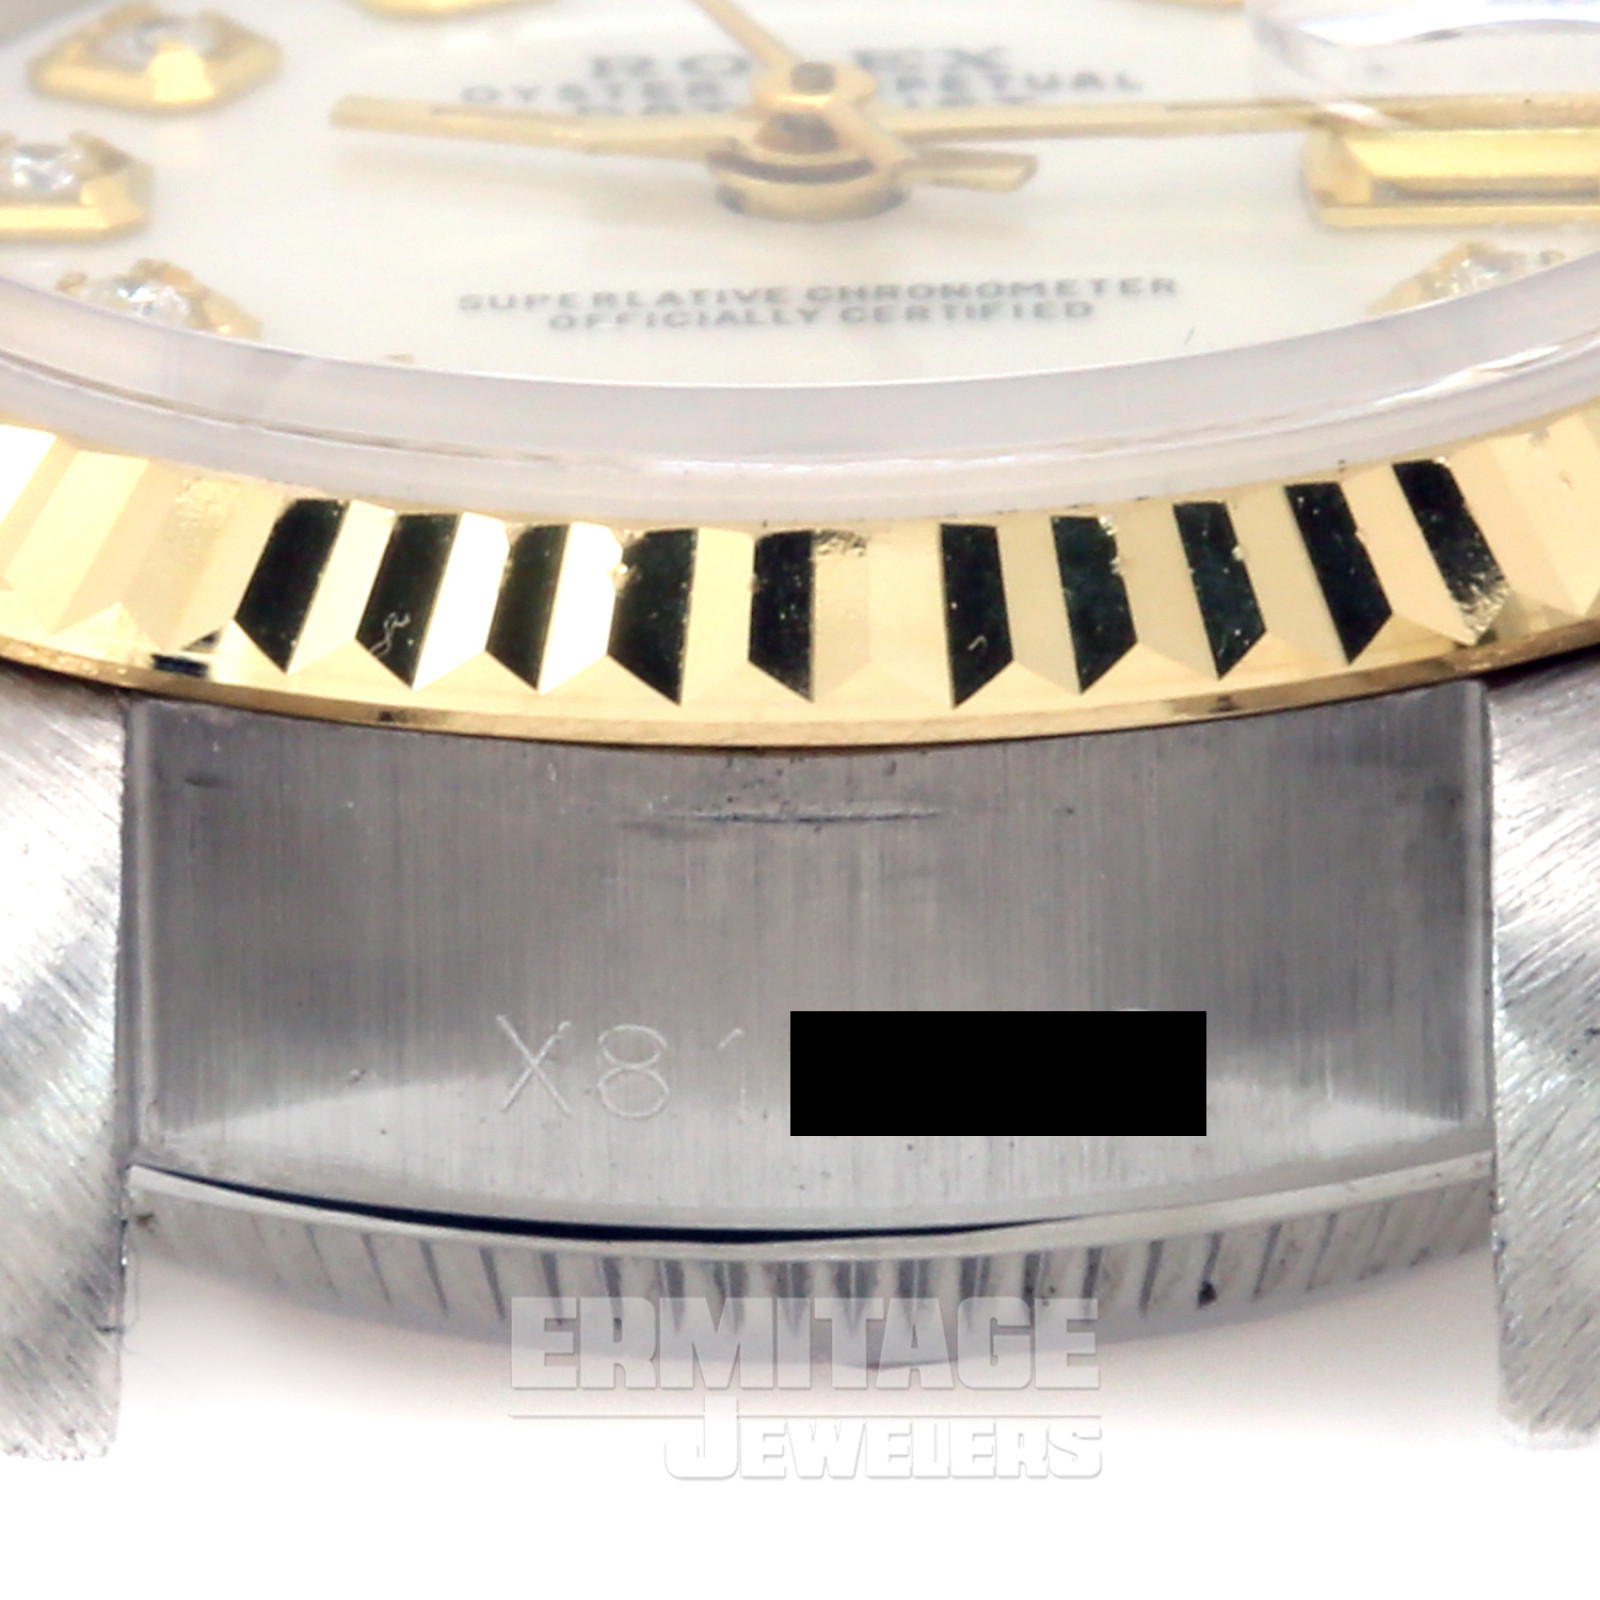 Rolex Datejust 69173 with Mother Of Pearl Dial